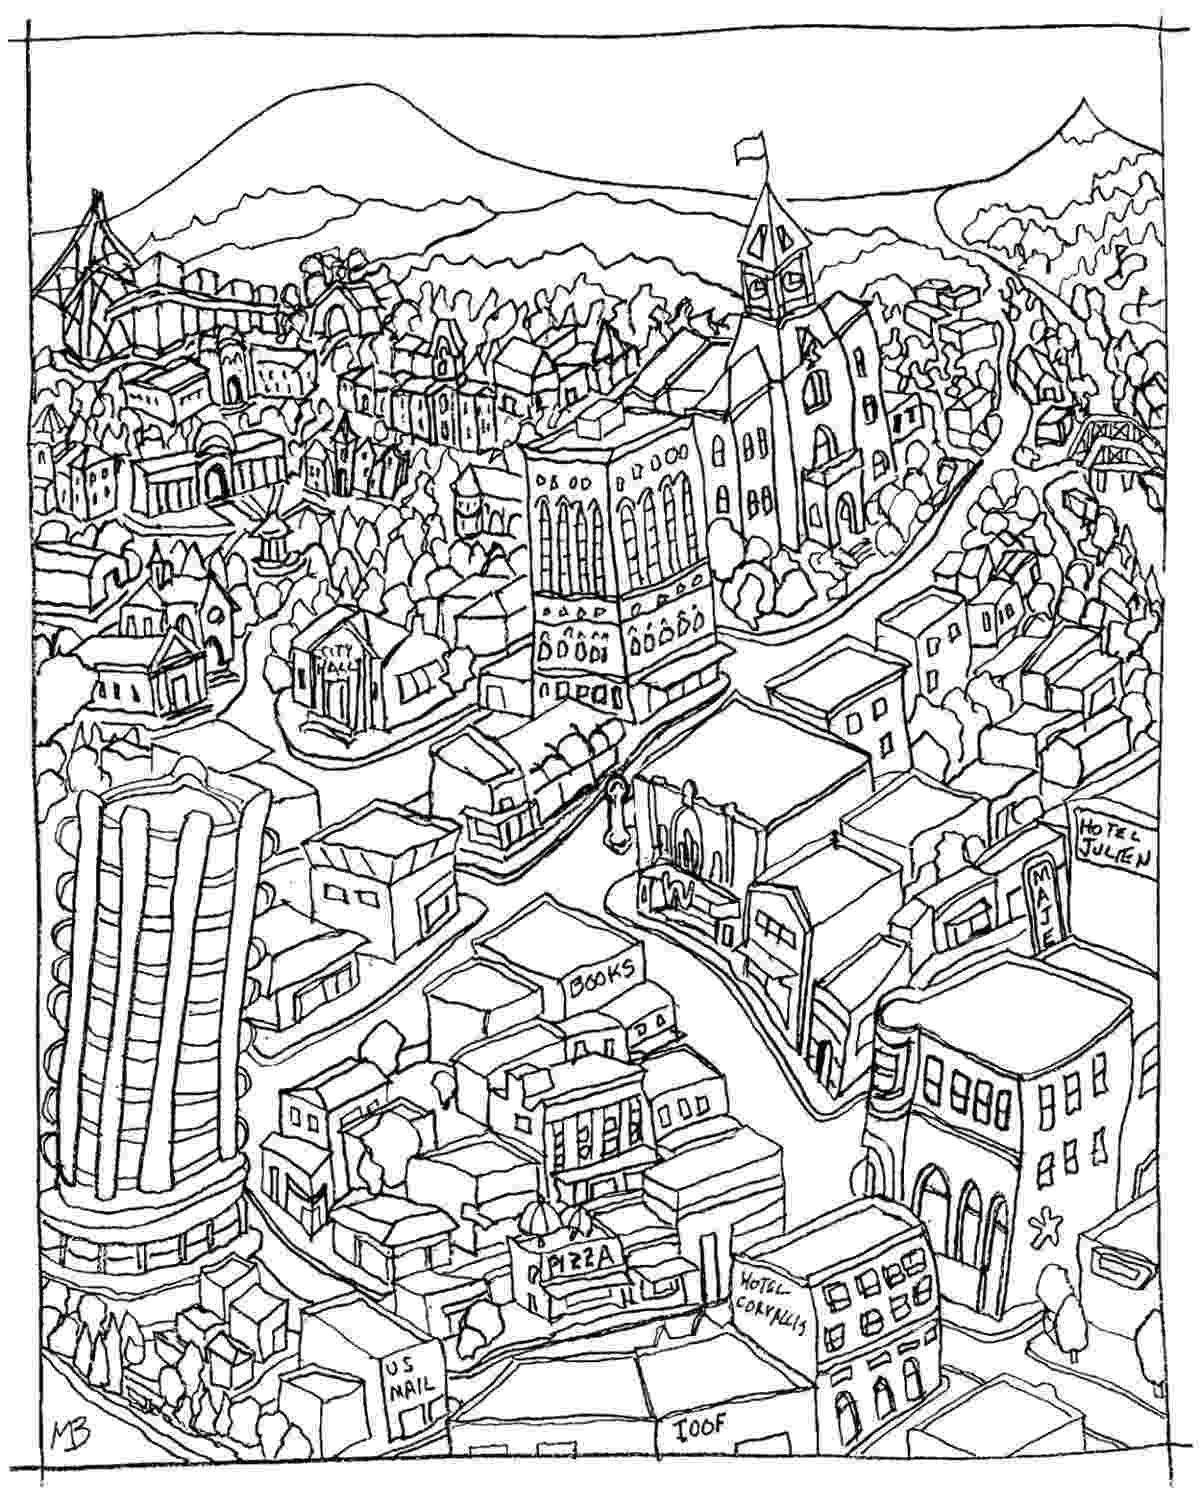 coloring book chance the r er cd corvallis coloring pages visual gazettetimescom er coloring the r chance cd book 